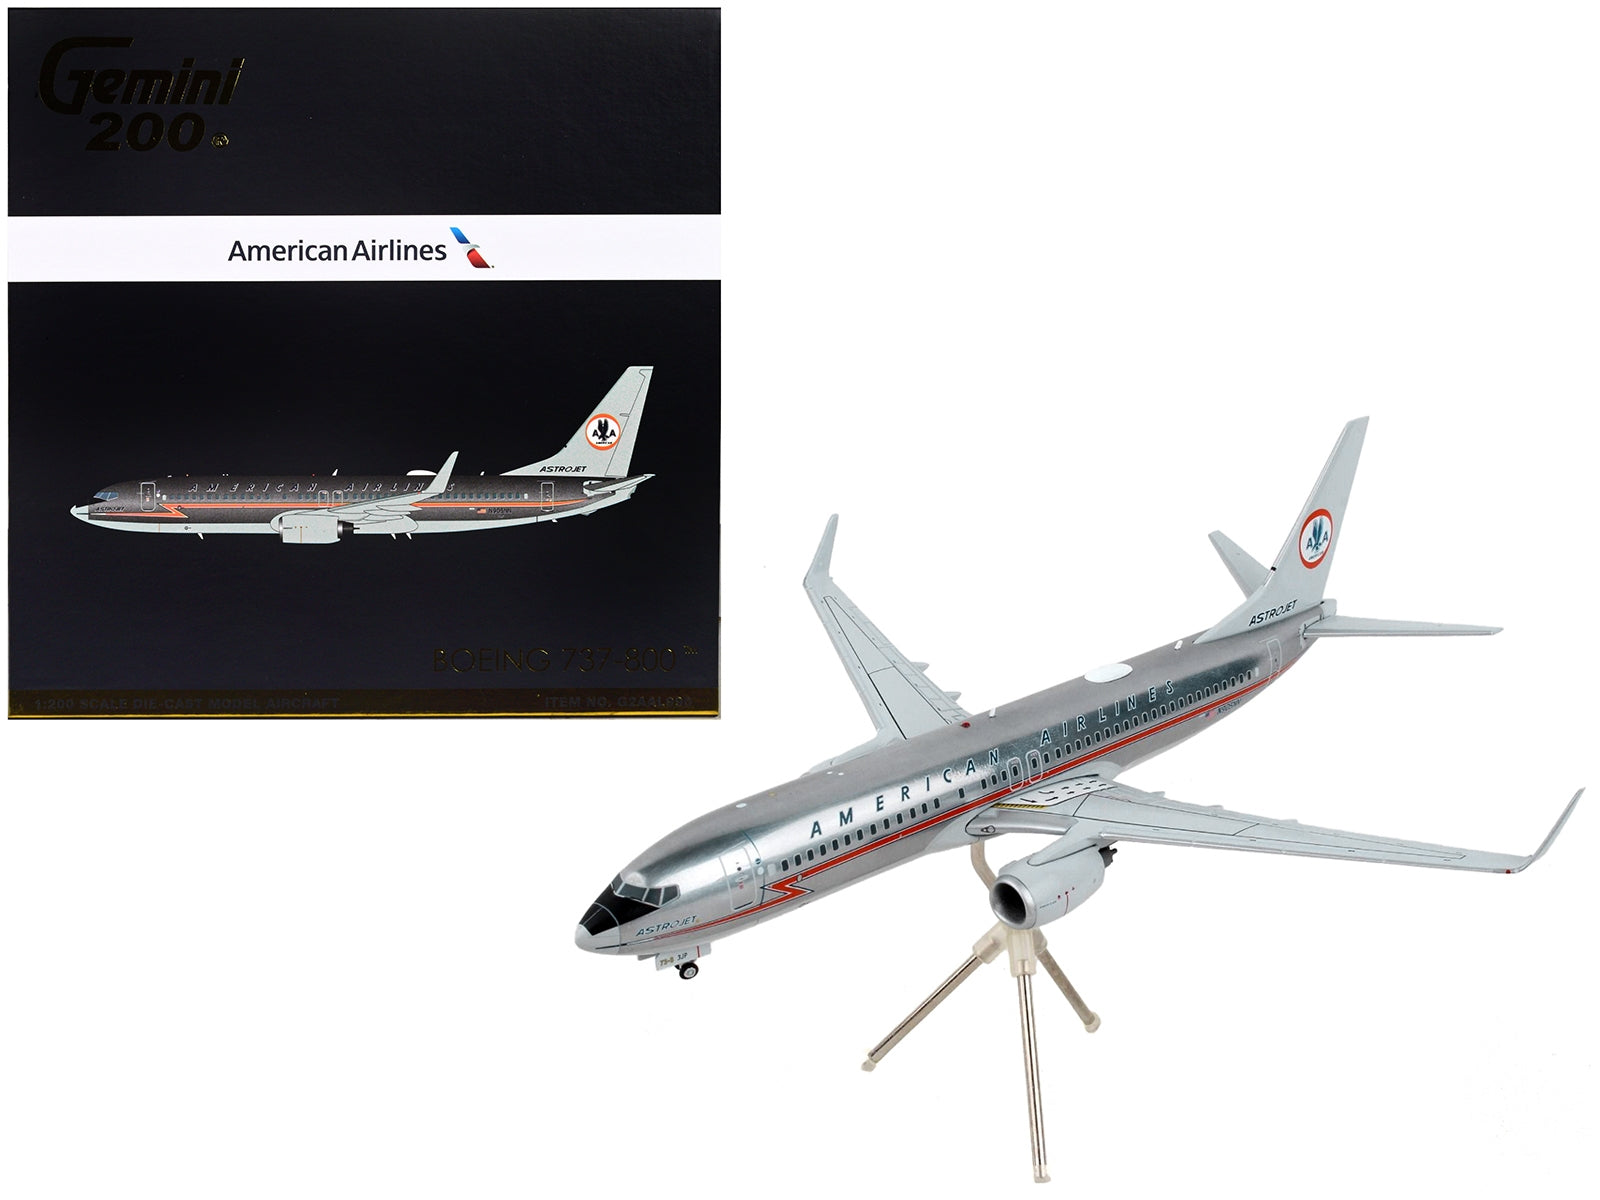 Boeing 737-800 Commercial Aircraft "American Airlines - AstroJet" Silver with Red Stripes